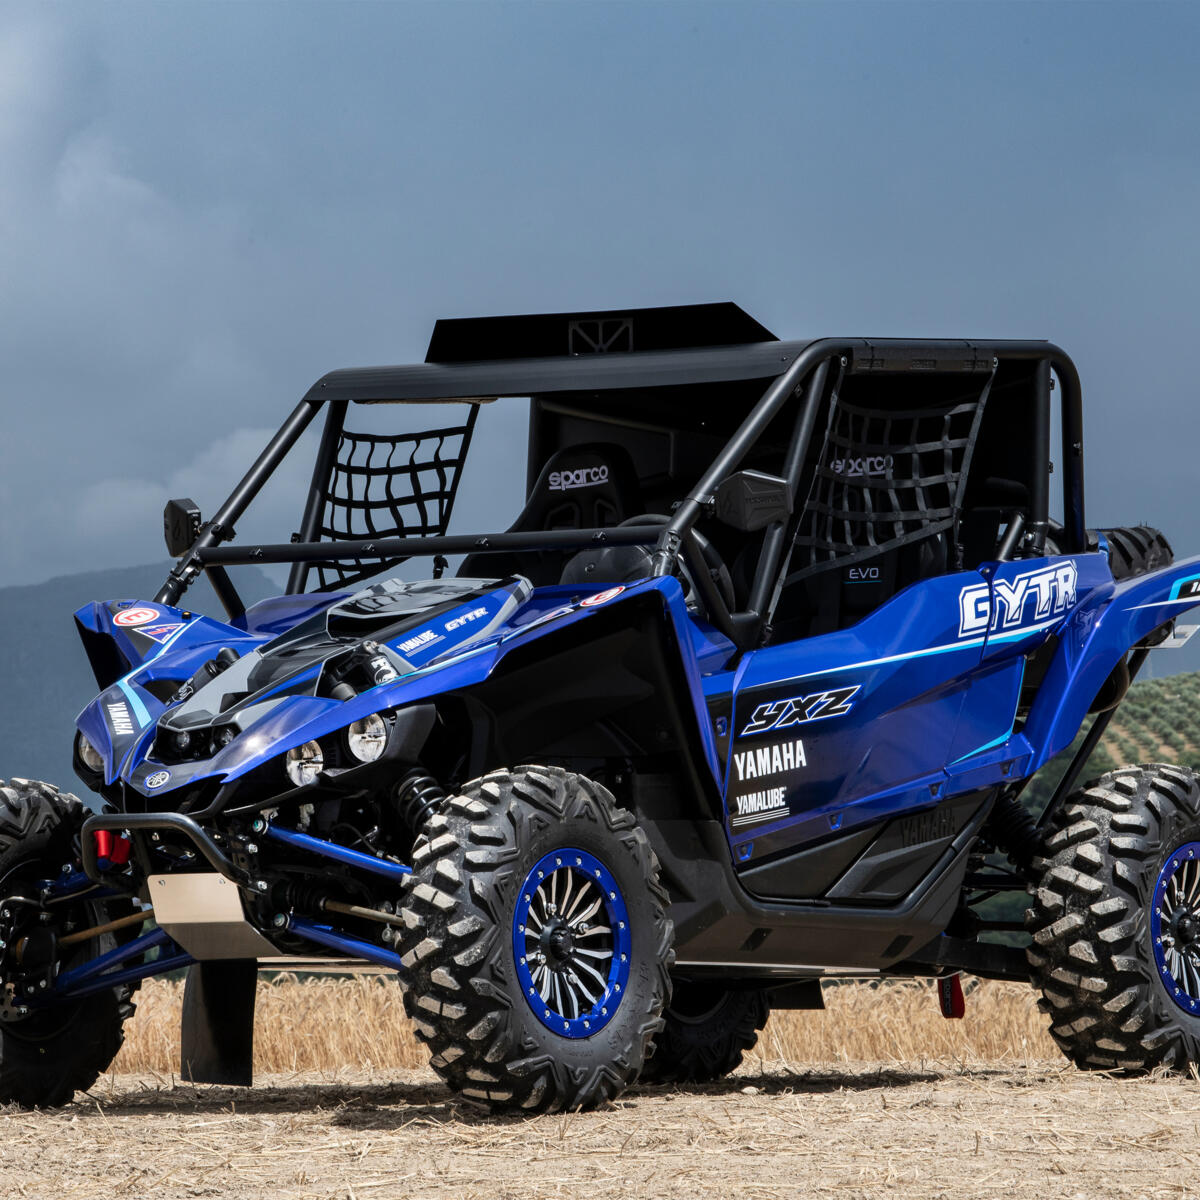 Gives the unit more protection on plastic parts and enhance the racing look of YXZ1000